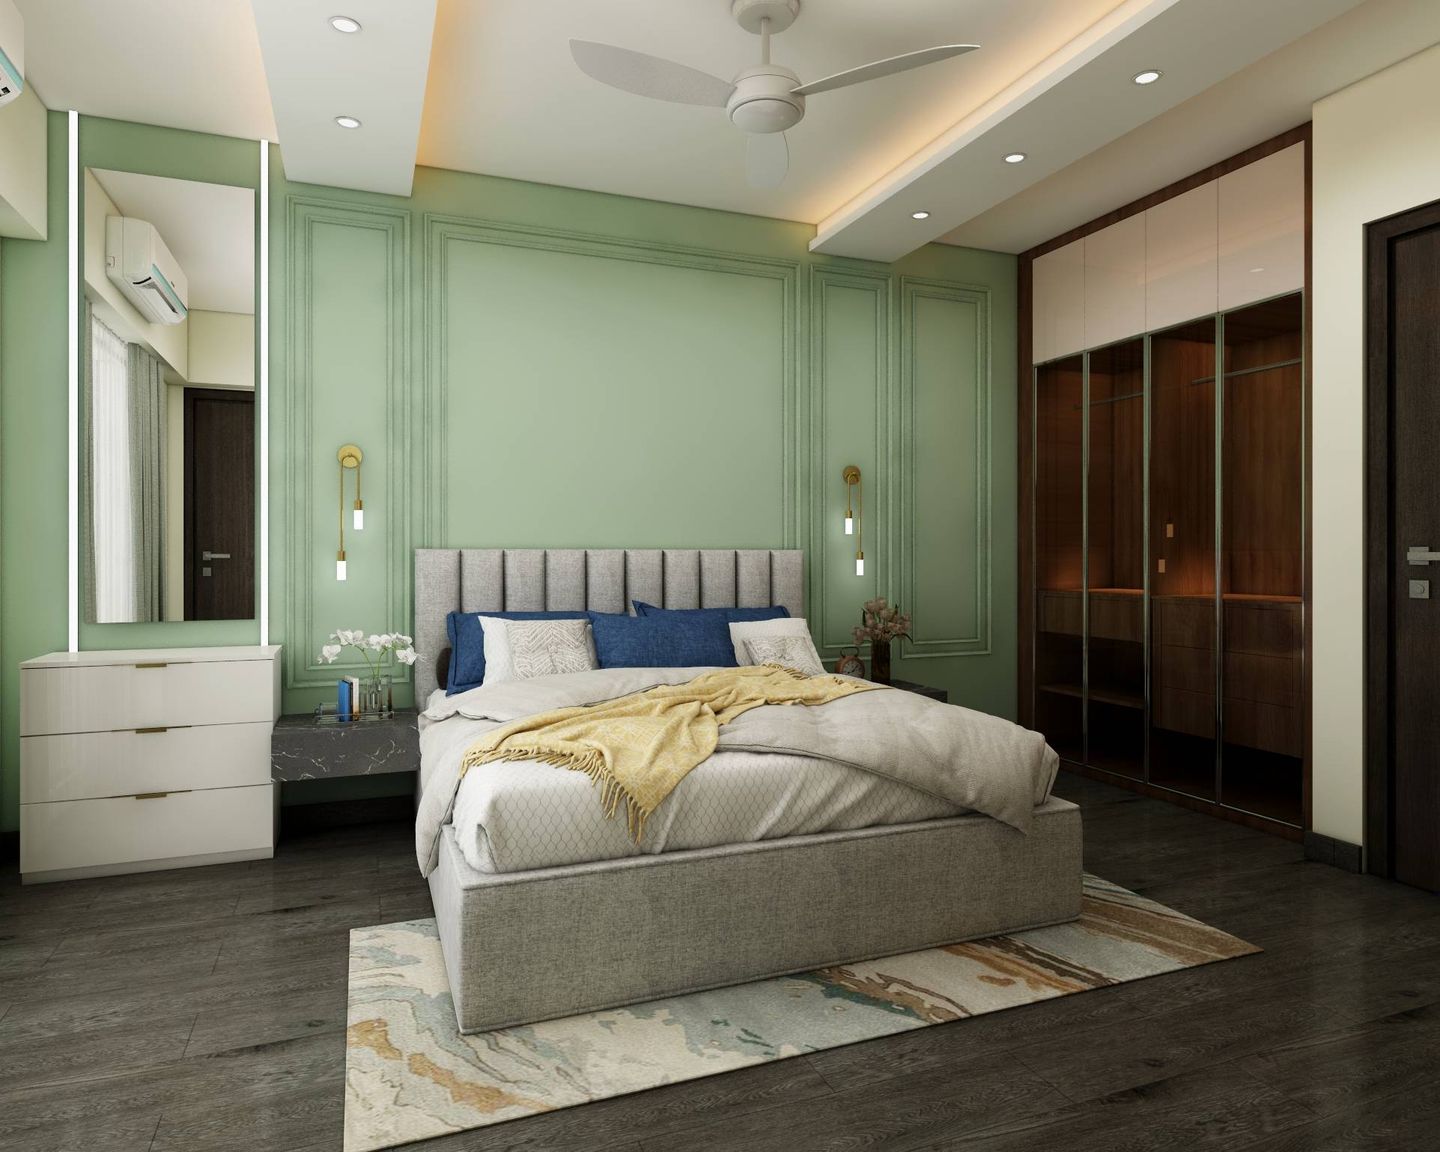 Master Bedroom Design With Mint-Green Wall And Open Wardrobe Storage - Livspace